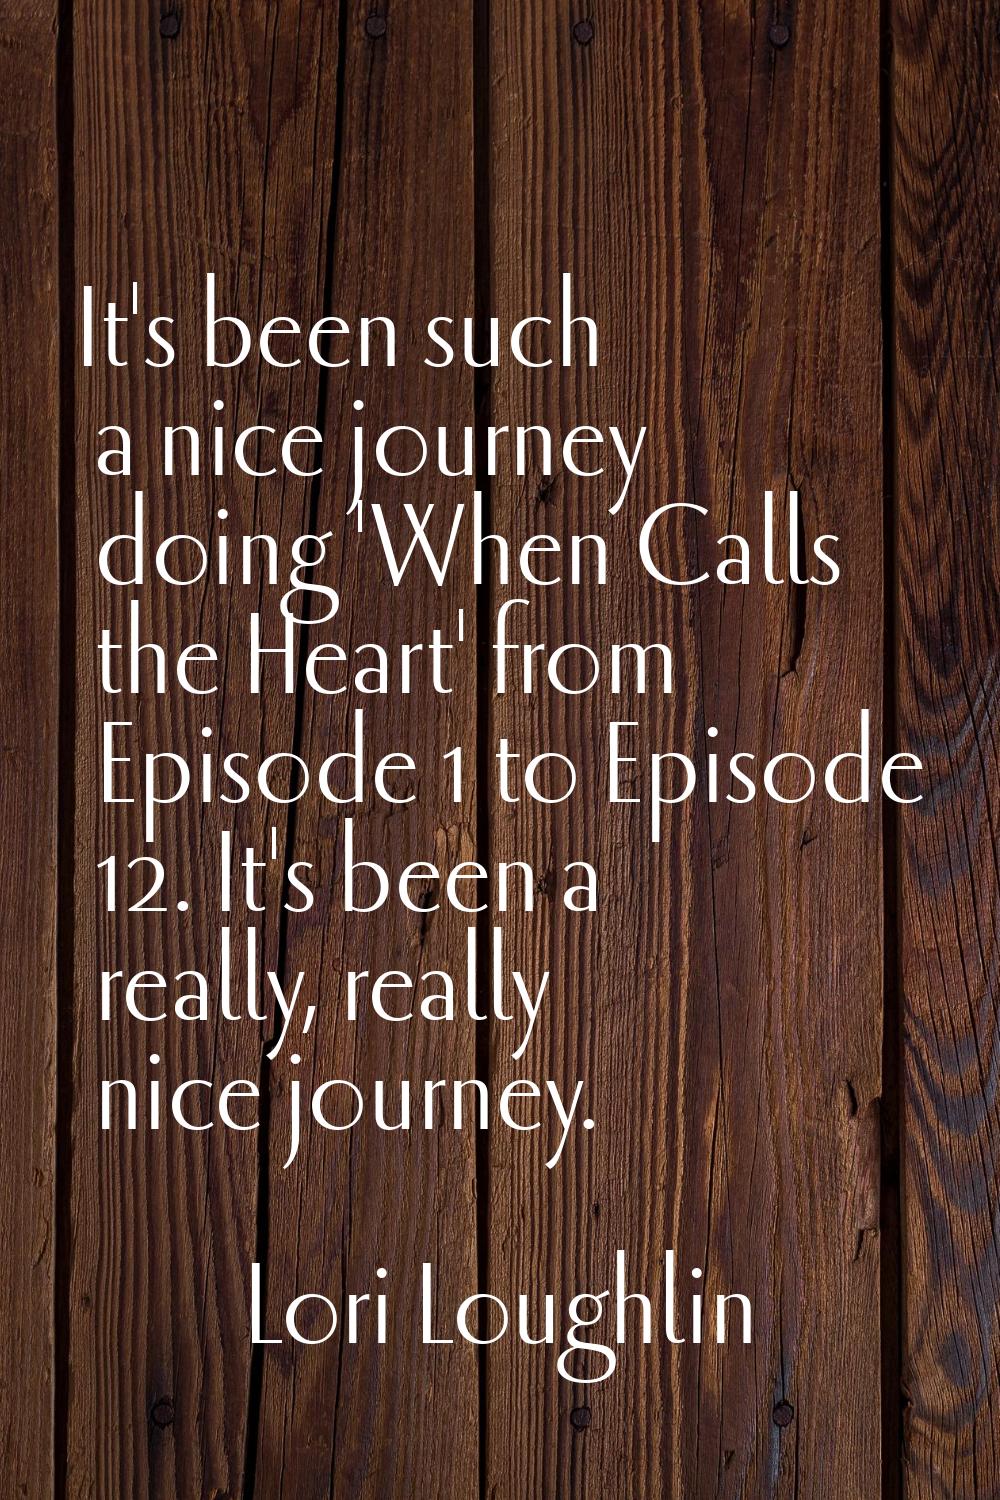 It's been such a nice journey doing 'When Calls the Heart' from Episode 1 to Episode 12. It's been 